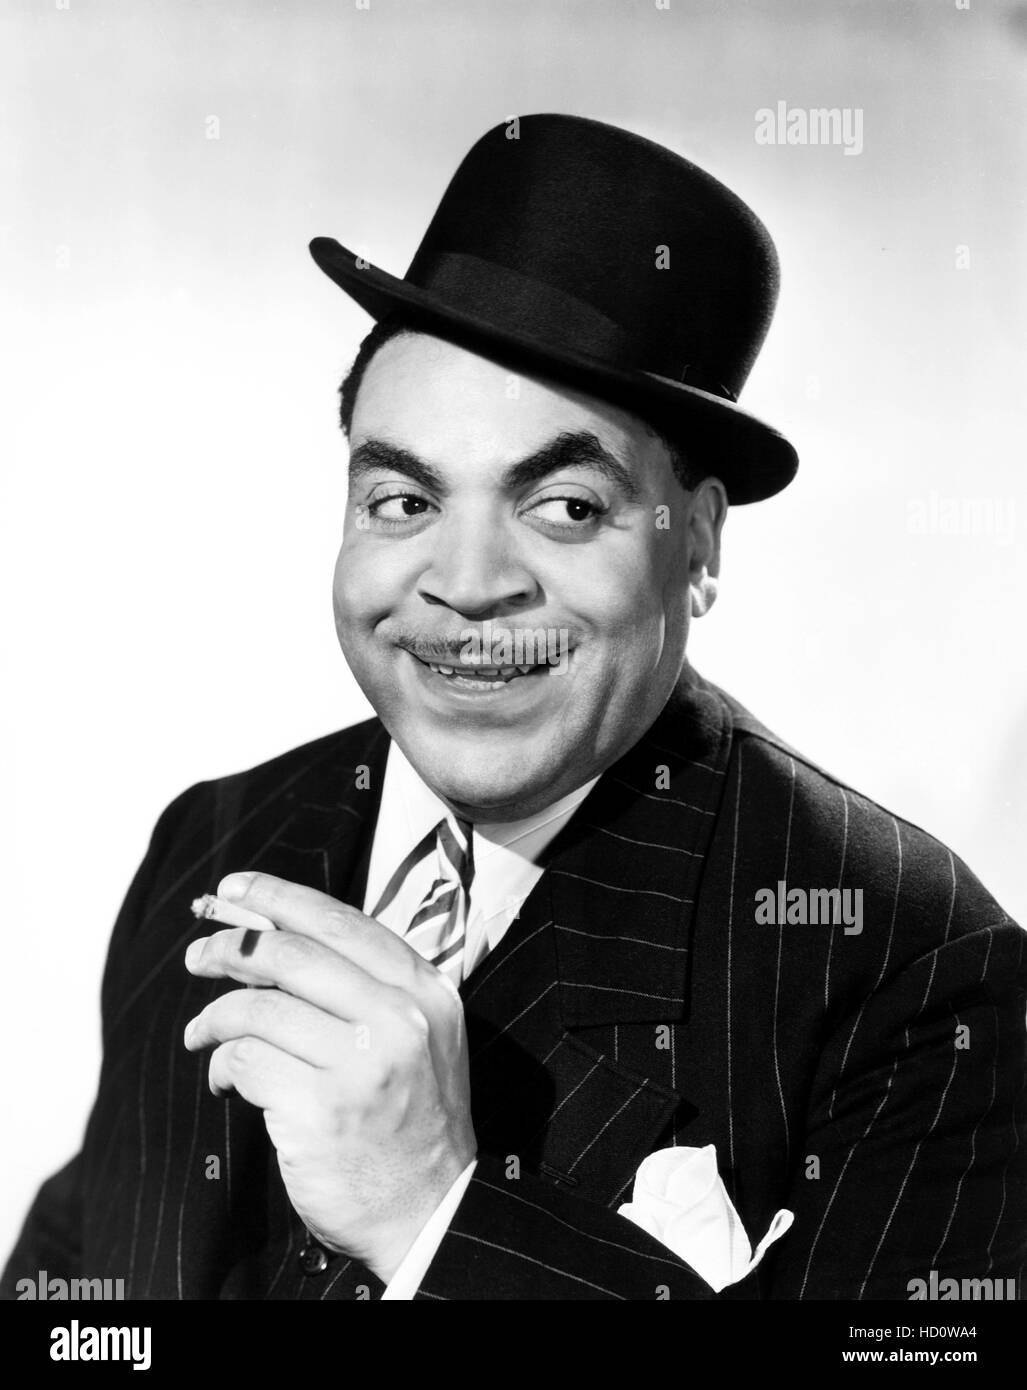 Pianist and Comedian Fats Waller New 8x10 Photo Jazz Musician 